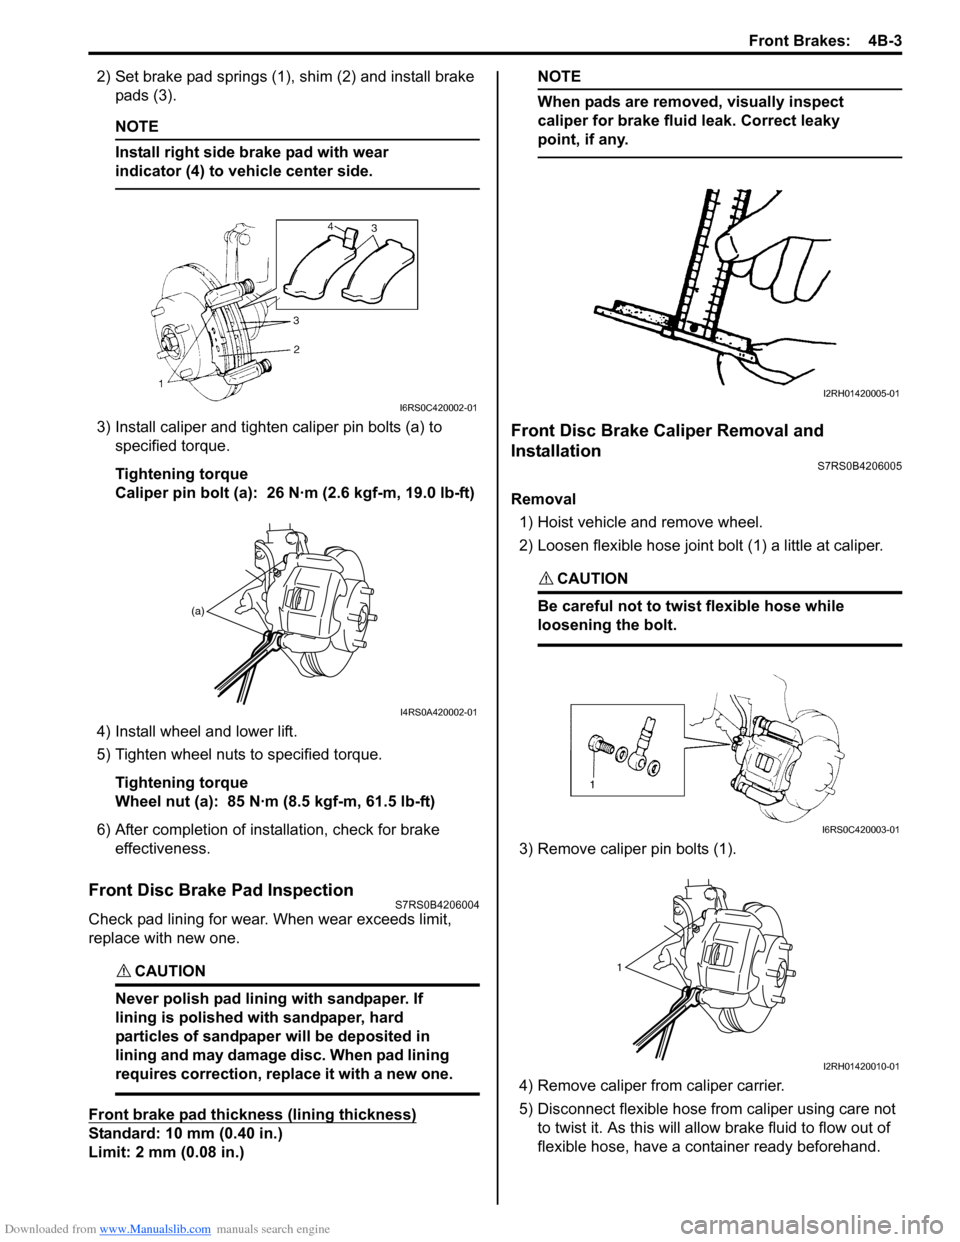 SUZUKI SWIFT 2008 2.G Service Workshop Manual Downloaded from www.Manualslib.com manuals search engine Front Brakes:  4B-3
2) Set brake pad springs (1), shim (2) and install brake pads (3).
NOTE
Install right side brake pad with wear 
indicator (